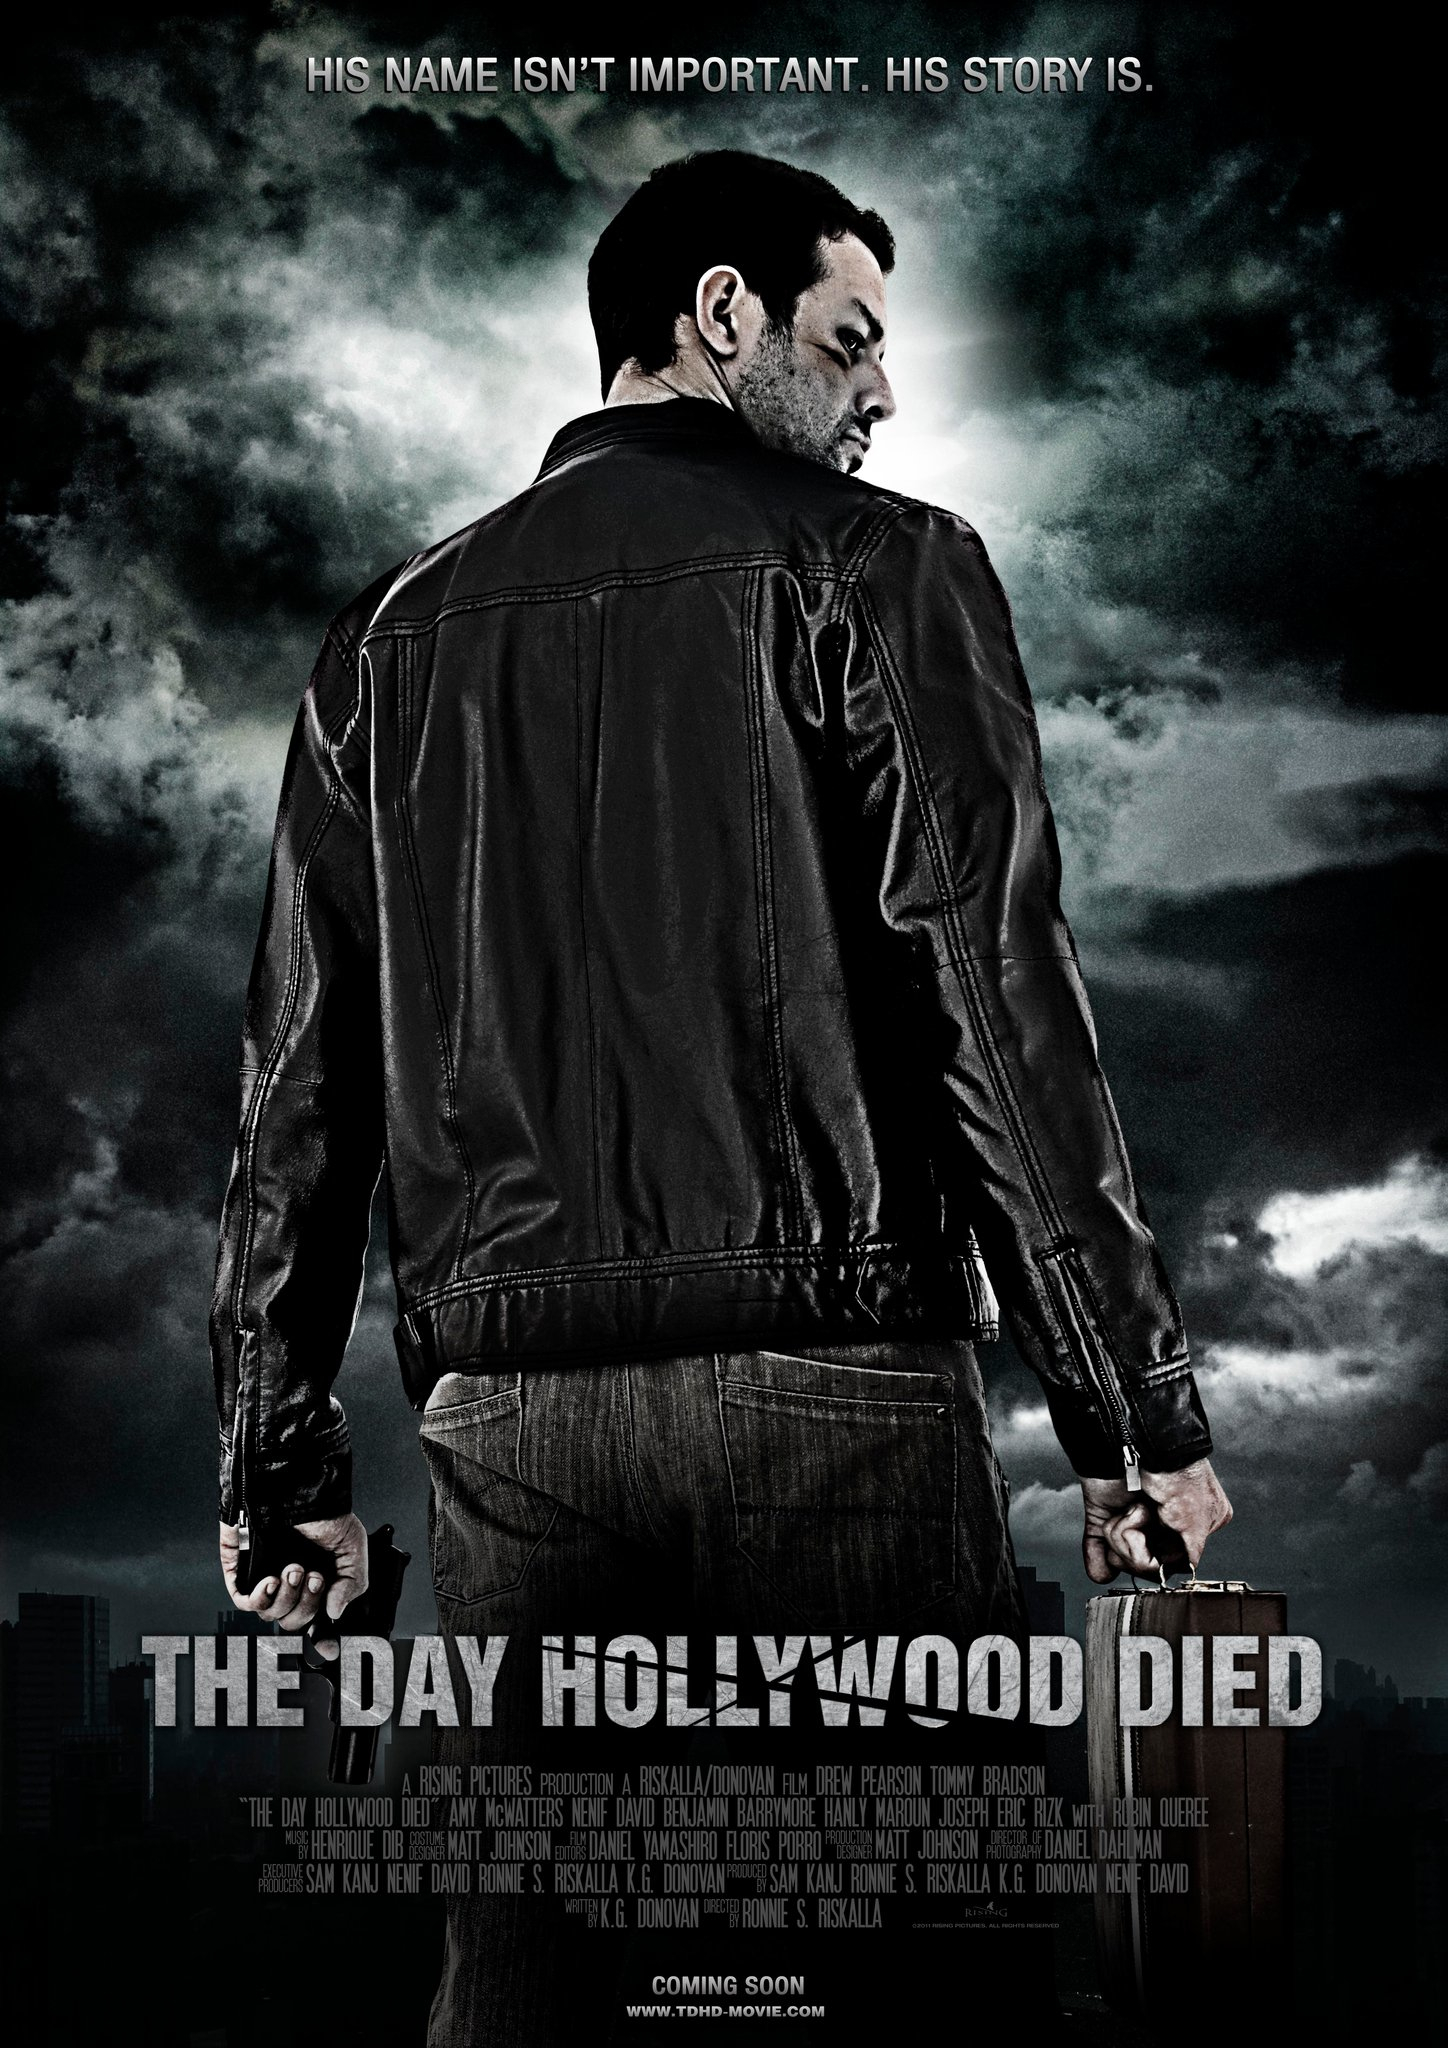 The Day Hollywood Died Theatrical Poster